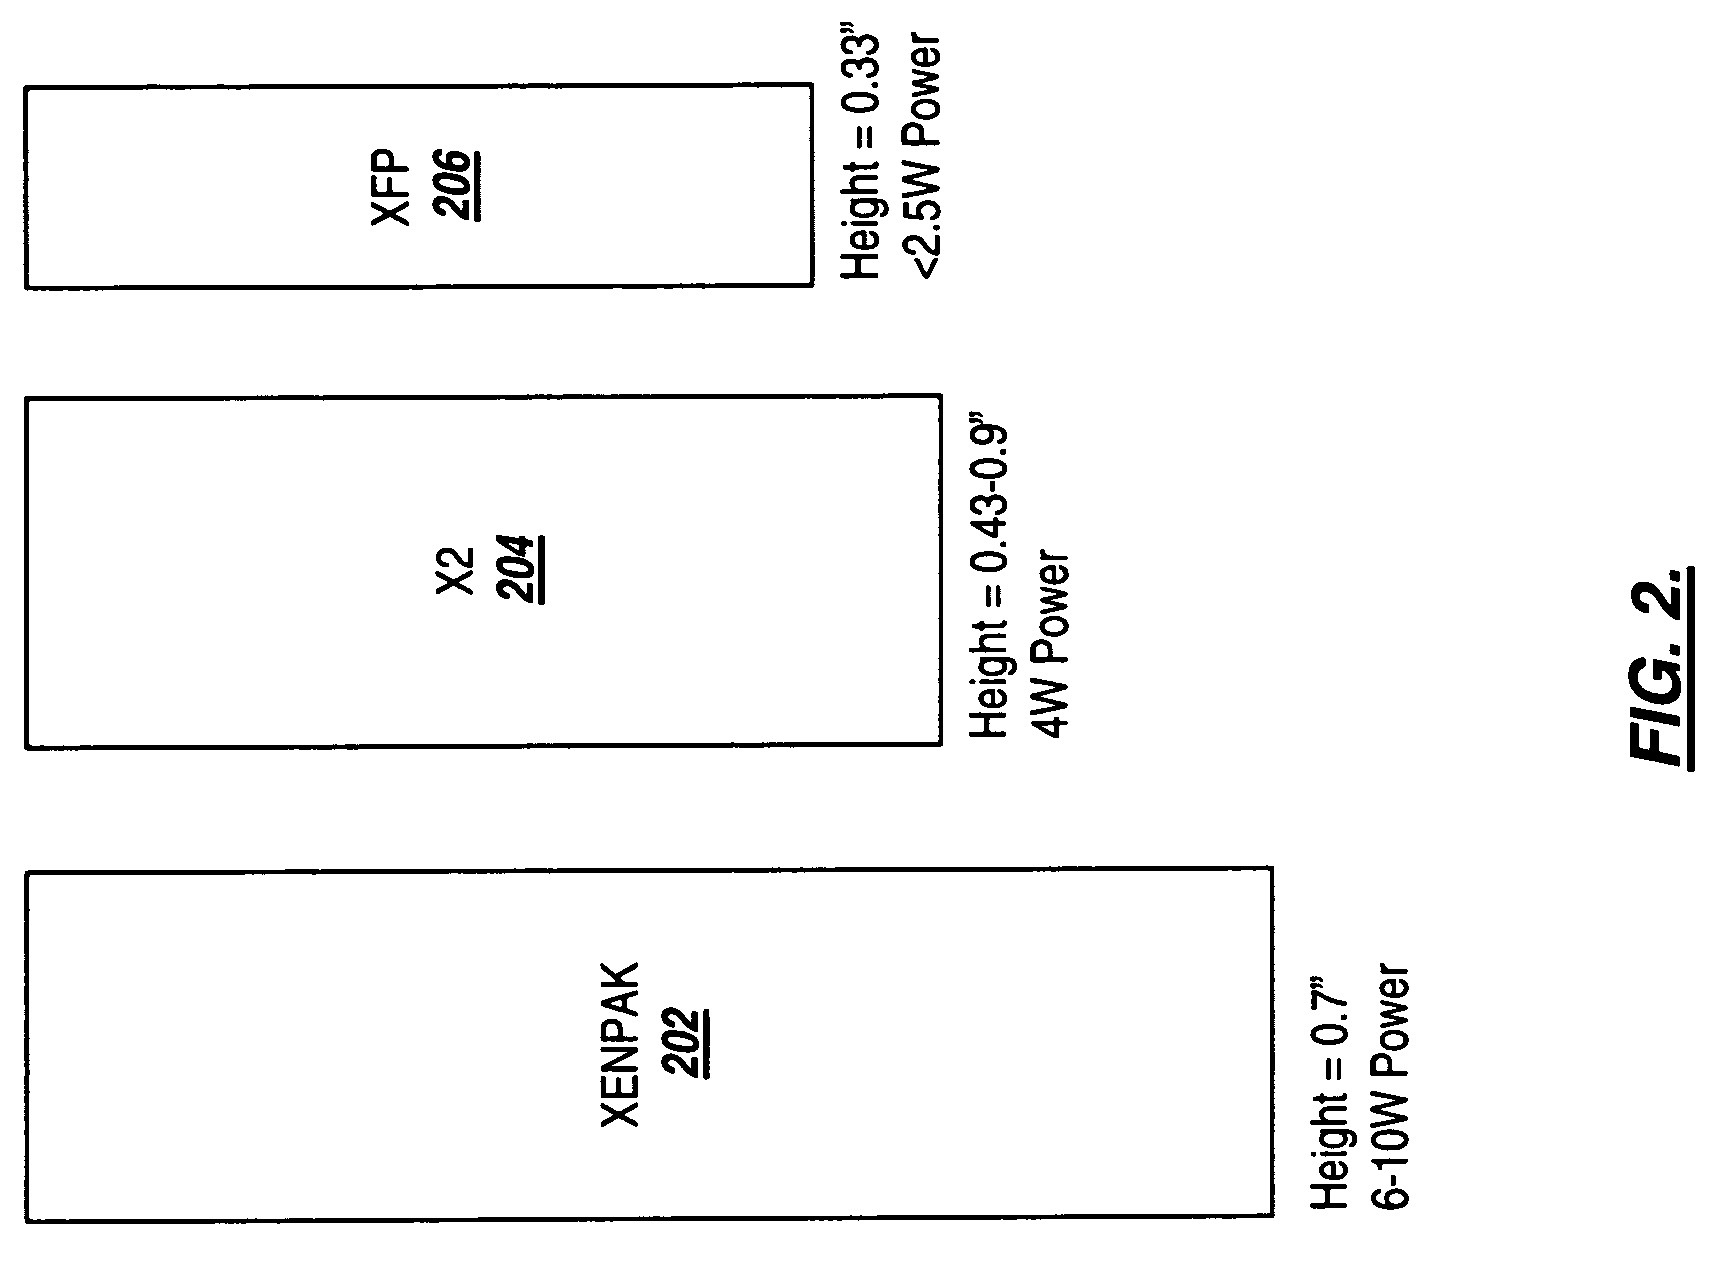 Systems and methods for the integration of framing, OAM and P, and forward error correction in pluggable optical transceiver devices